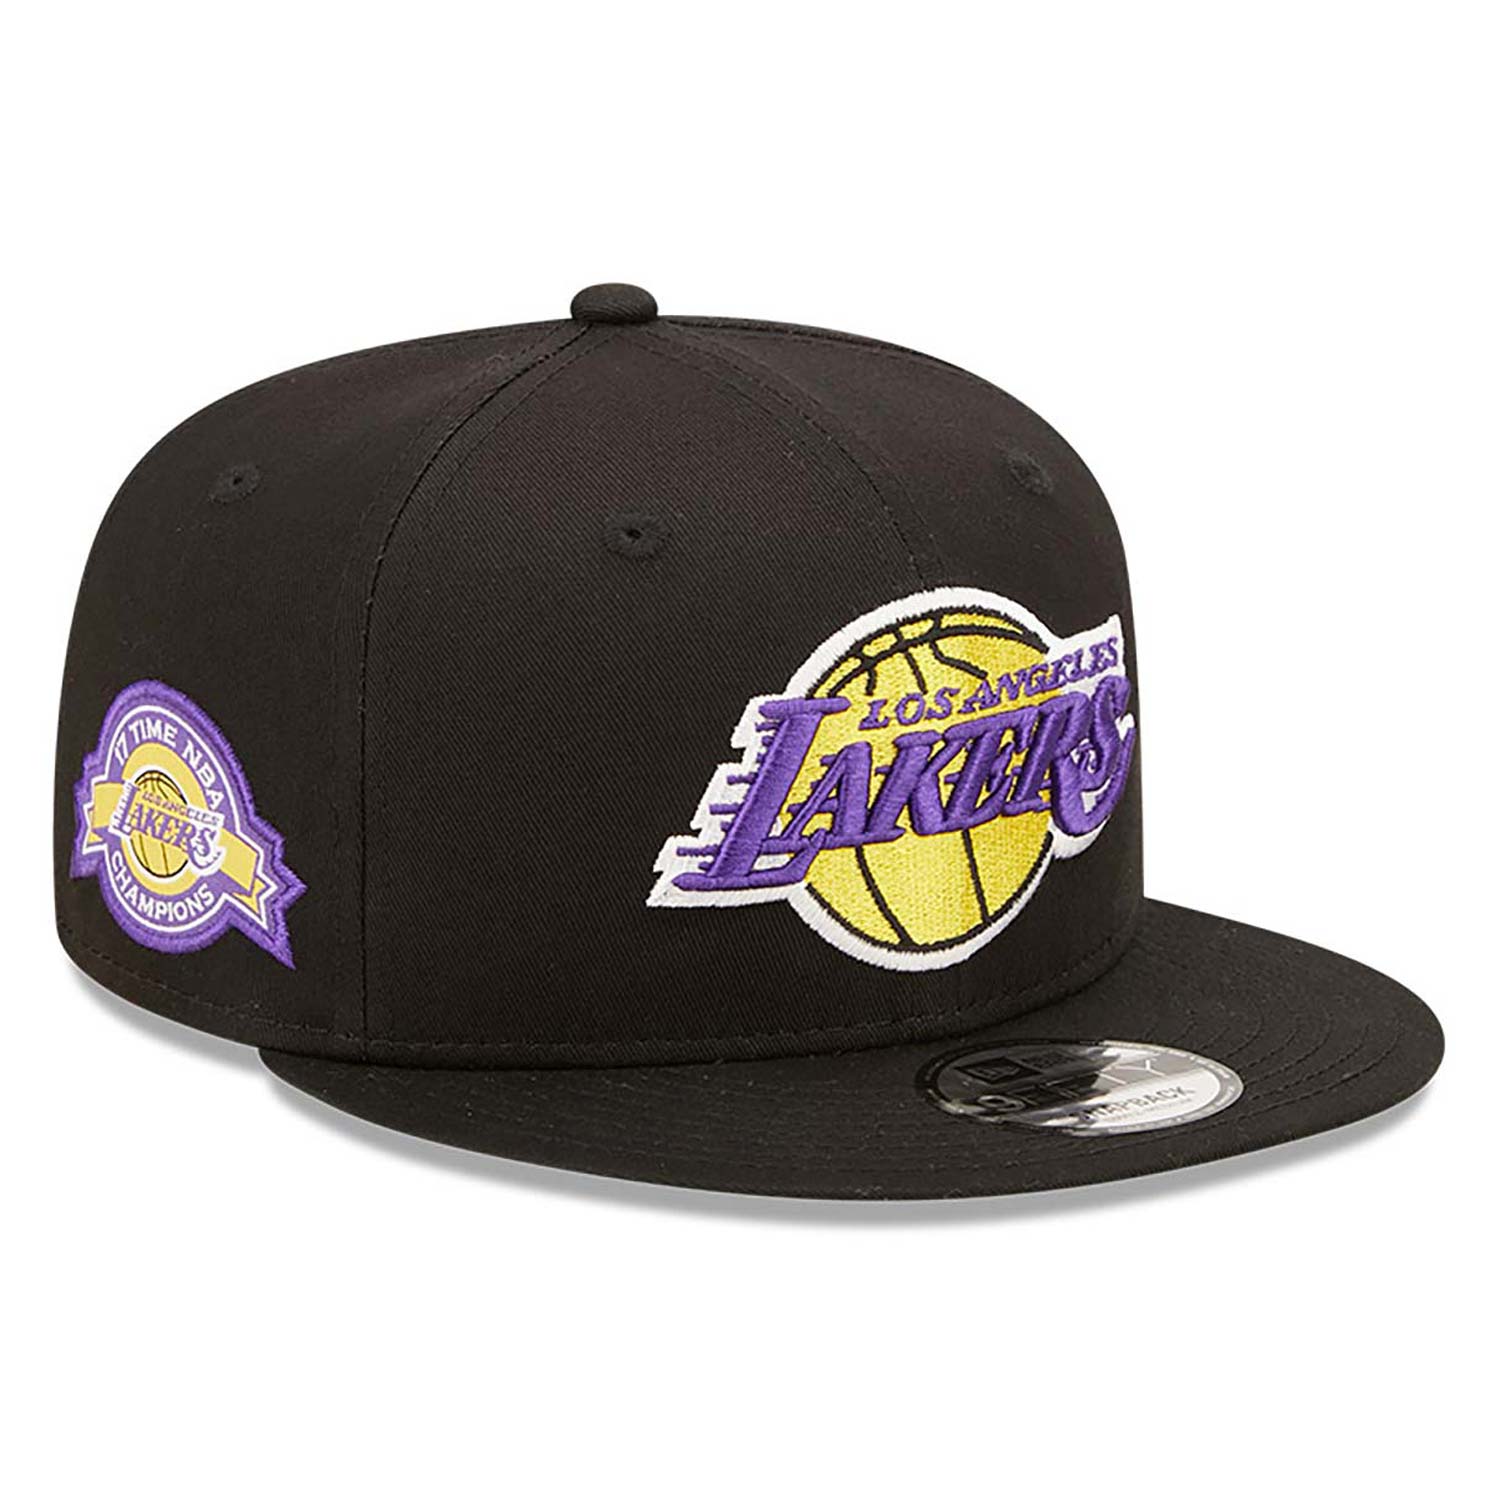 Los Angeles Lakers Hats in Los Angeles Lakers Team Shop 